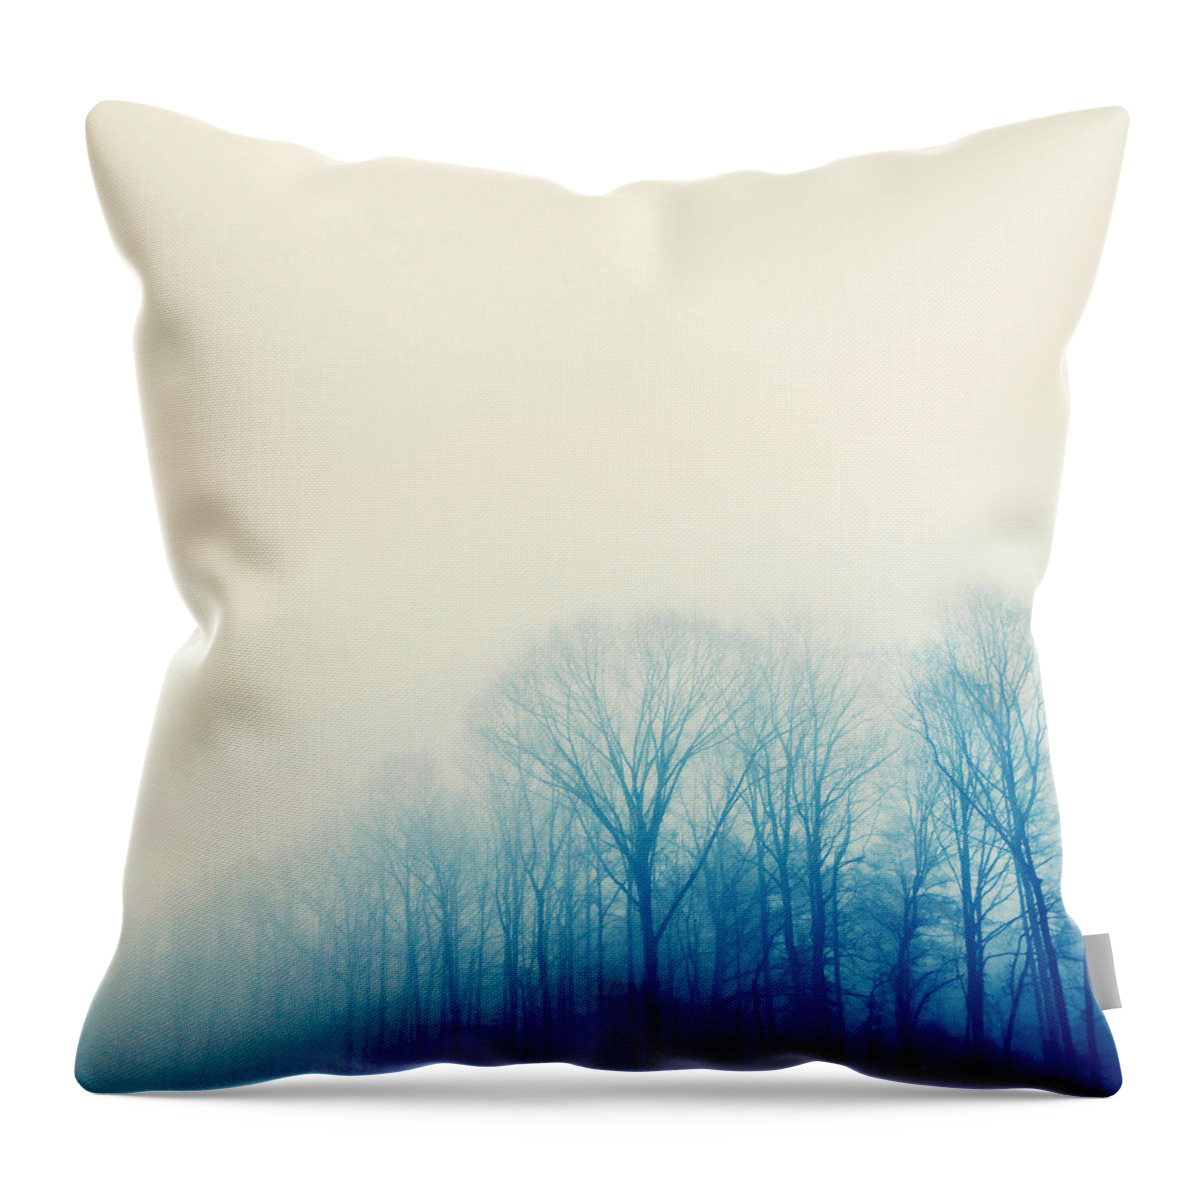 Alone Throw Pillow featuring the photograph Mystic by Kim Fearheiley